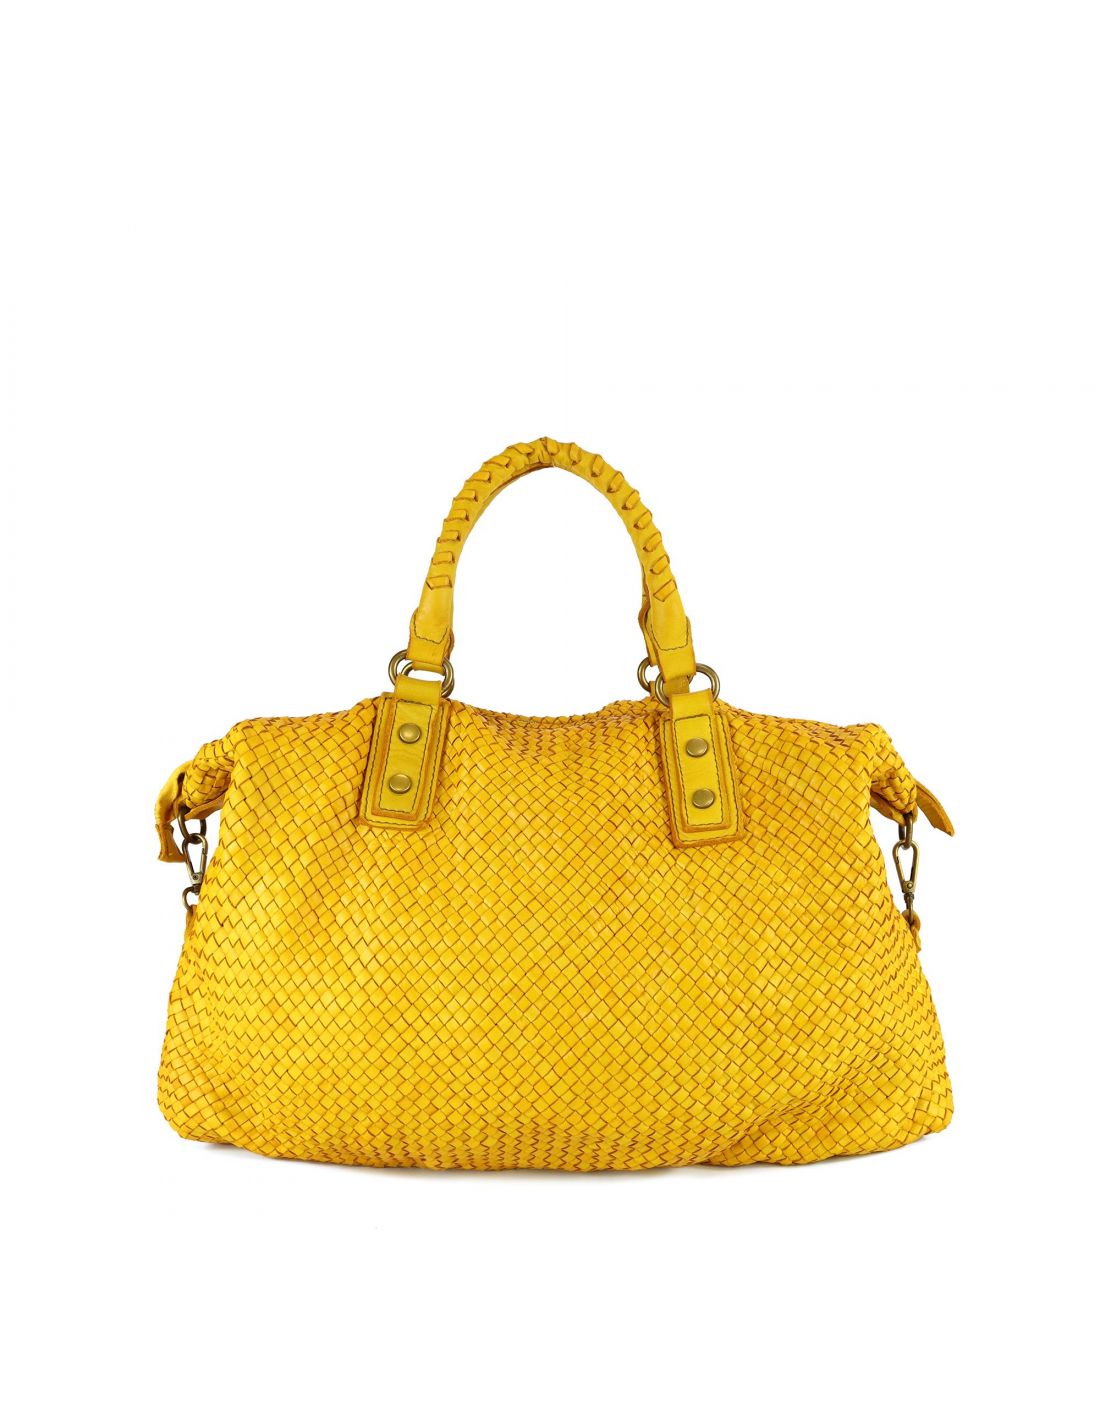 Braided handbag in genuine leather made in Italy